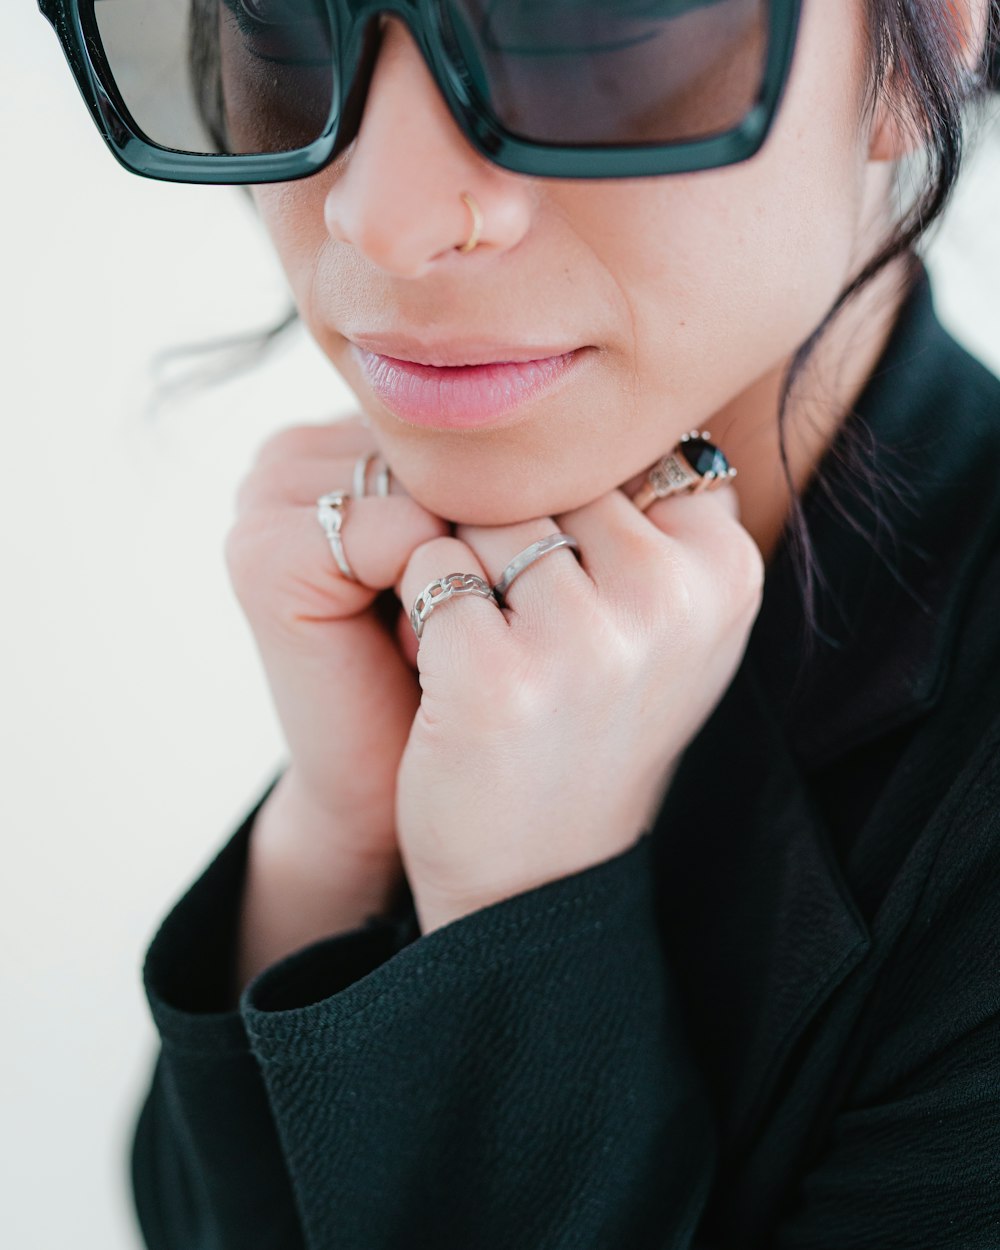 a woman wearing a pair of sunglasses and a ring